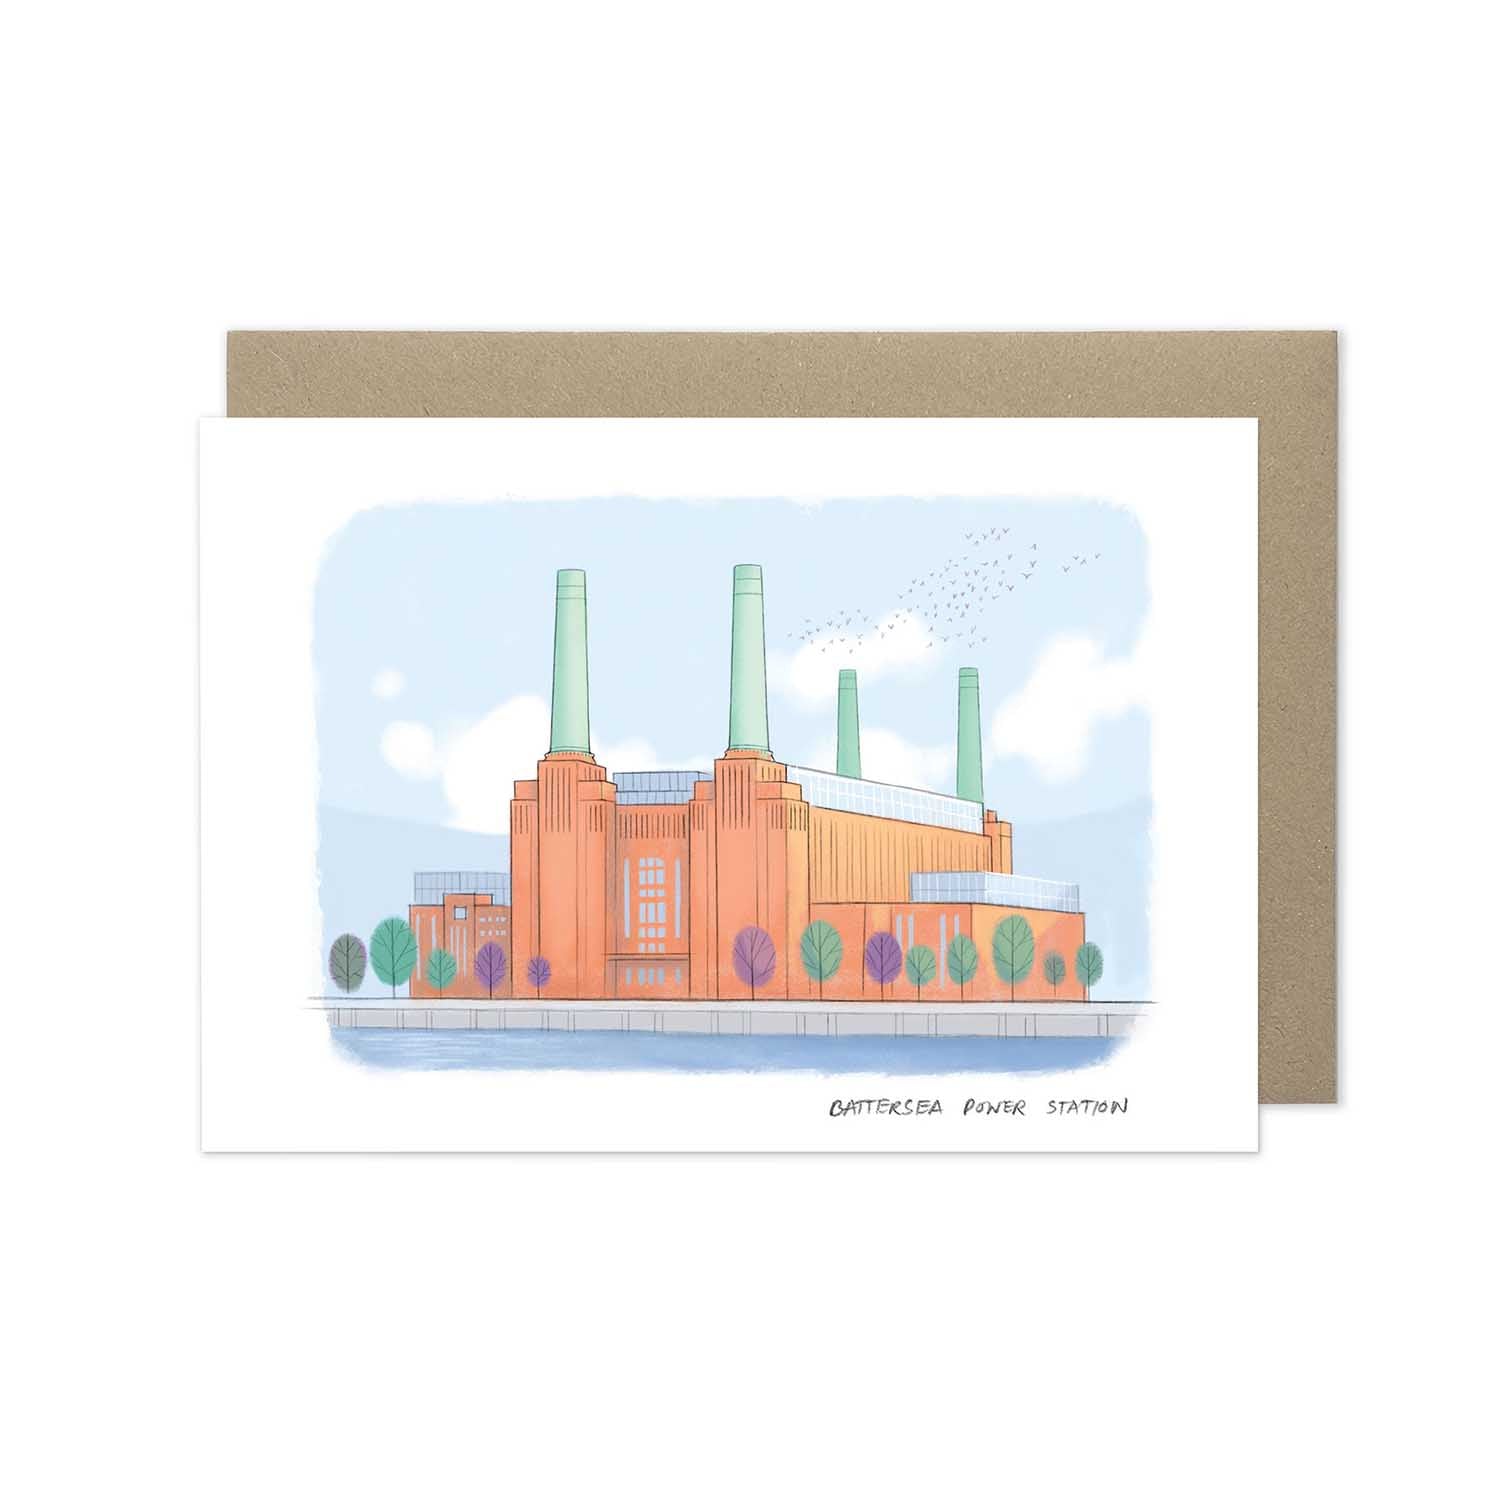 London's Battersea Power Station beautifully illustrated on a greeting card from mike green illustration.